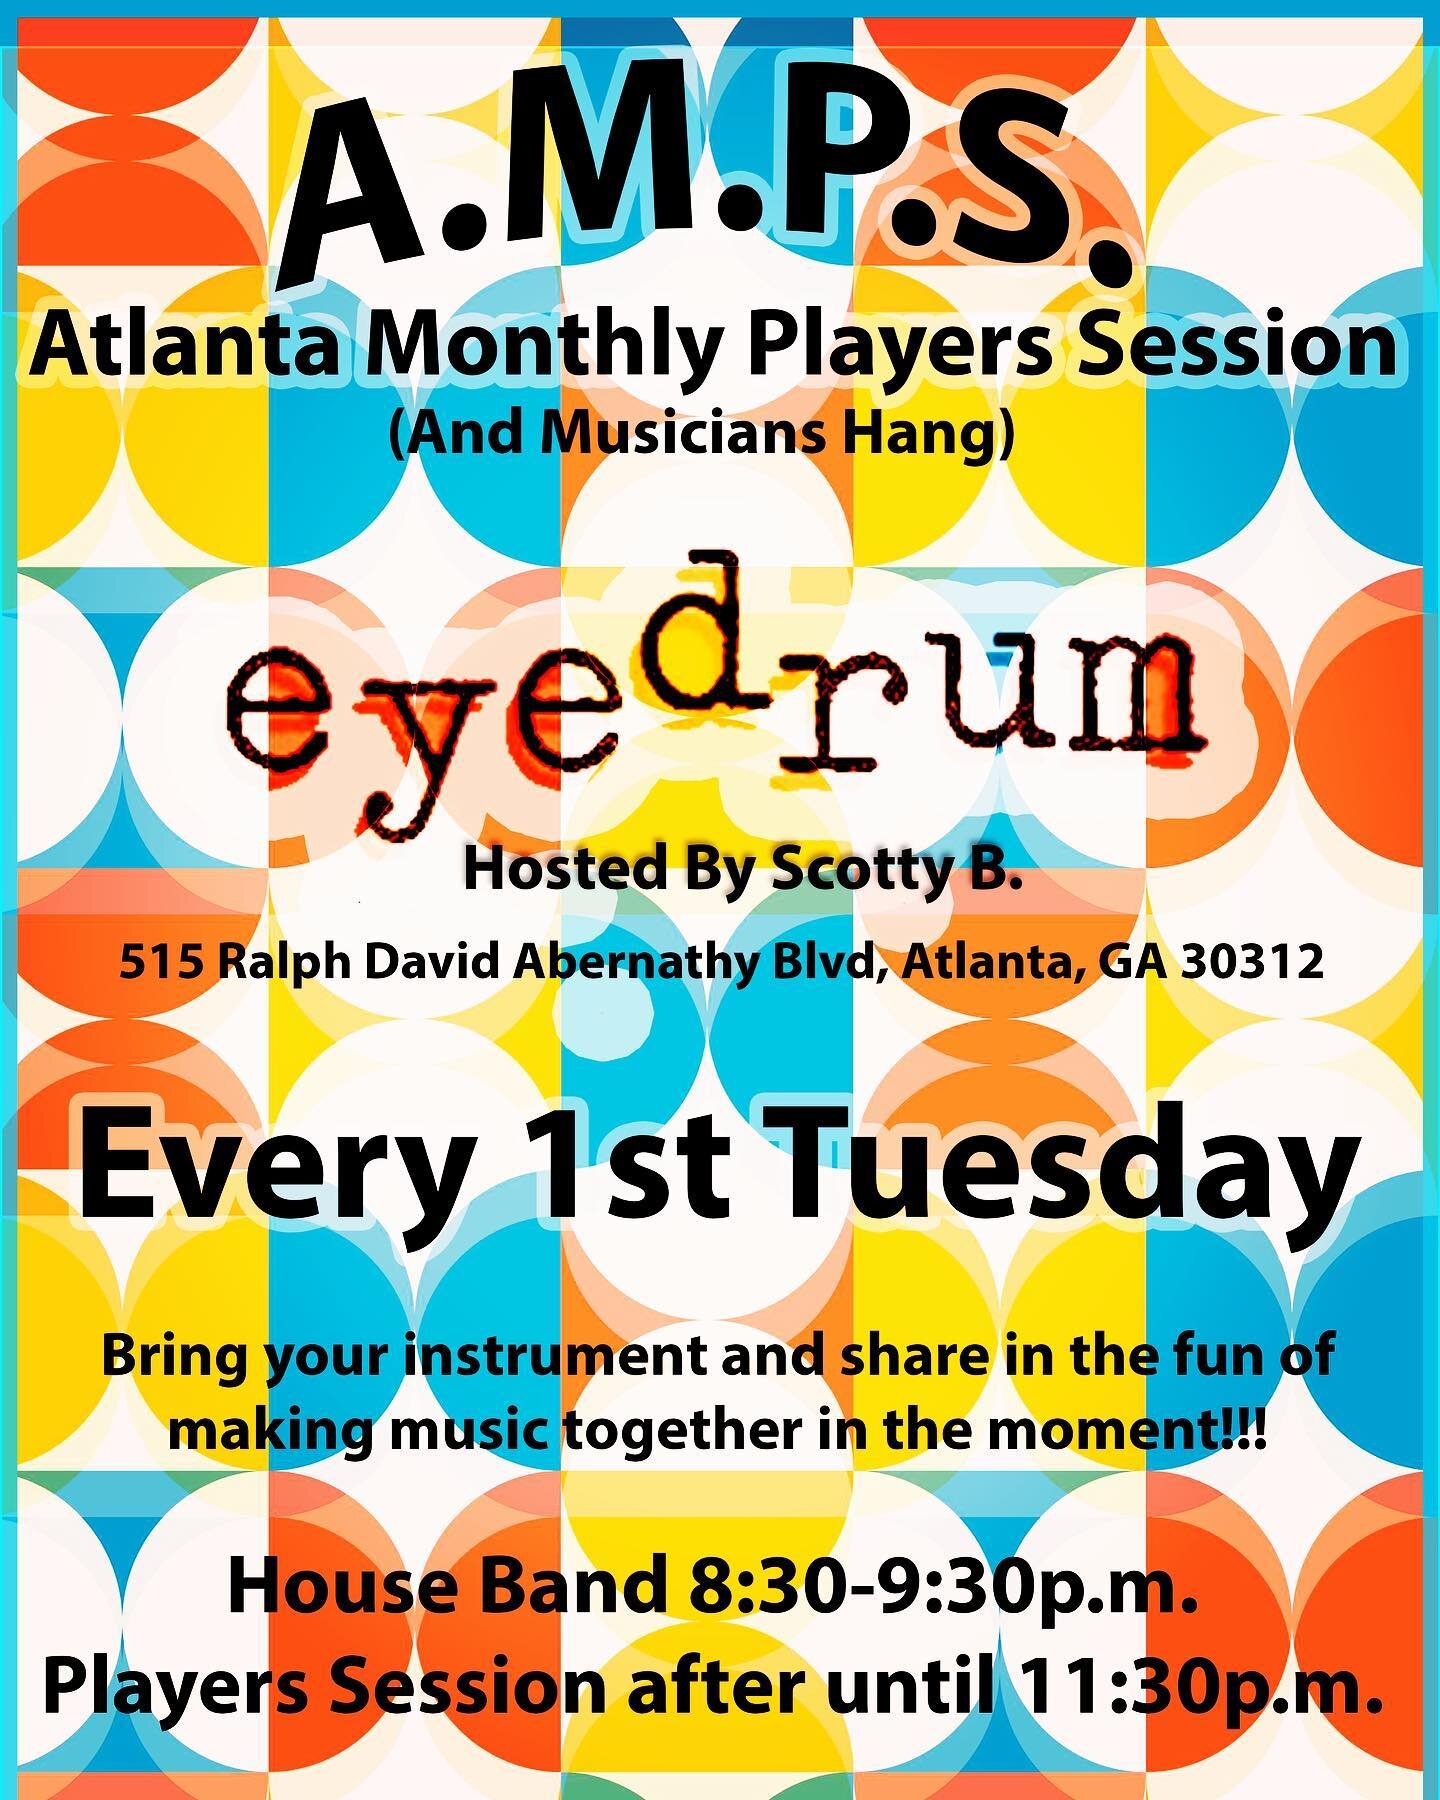 TONIGHT- Atlanta Monthly Player's Session @eyedrum House Band: @double_dubby (drums) @fourpx (Guitar) @j_m_pepper (bass) @cherrywhitemuse (keys) @moni.moan (vocals) and SisterSai (cello)

Experience an exhilarating musical journey with Scotty B. at t